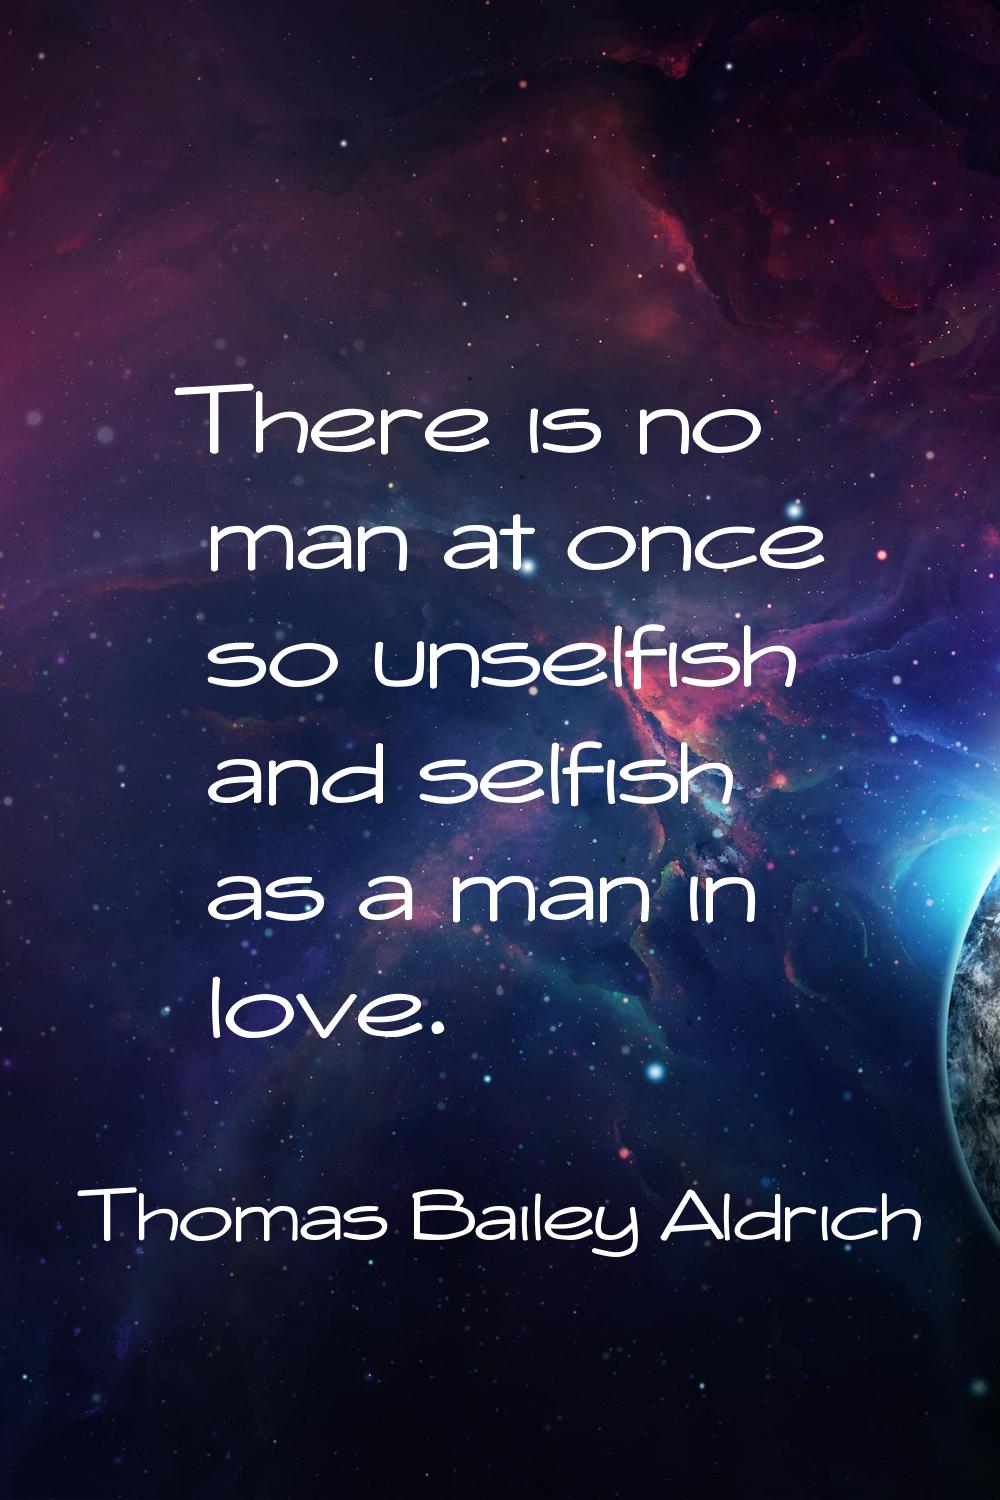 There is no man at once so unselfish and selfish as a man in love.